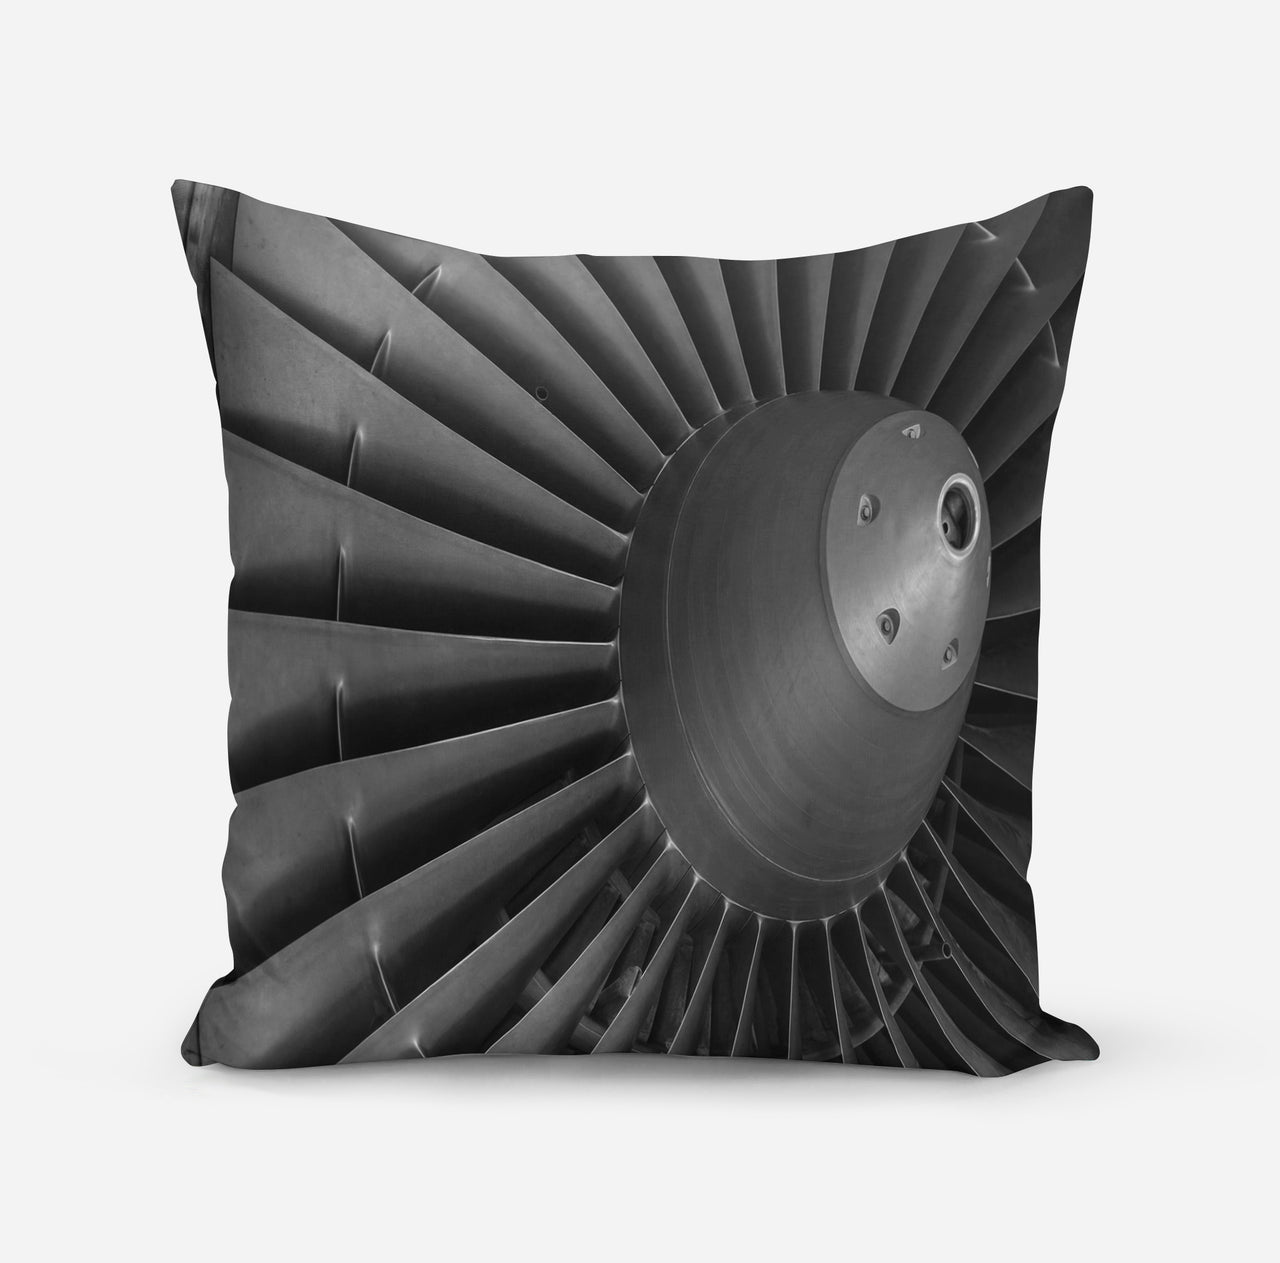 Super View of Jet Engine Designed Pillows